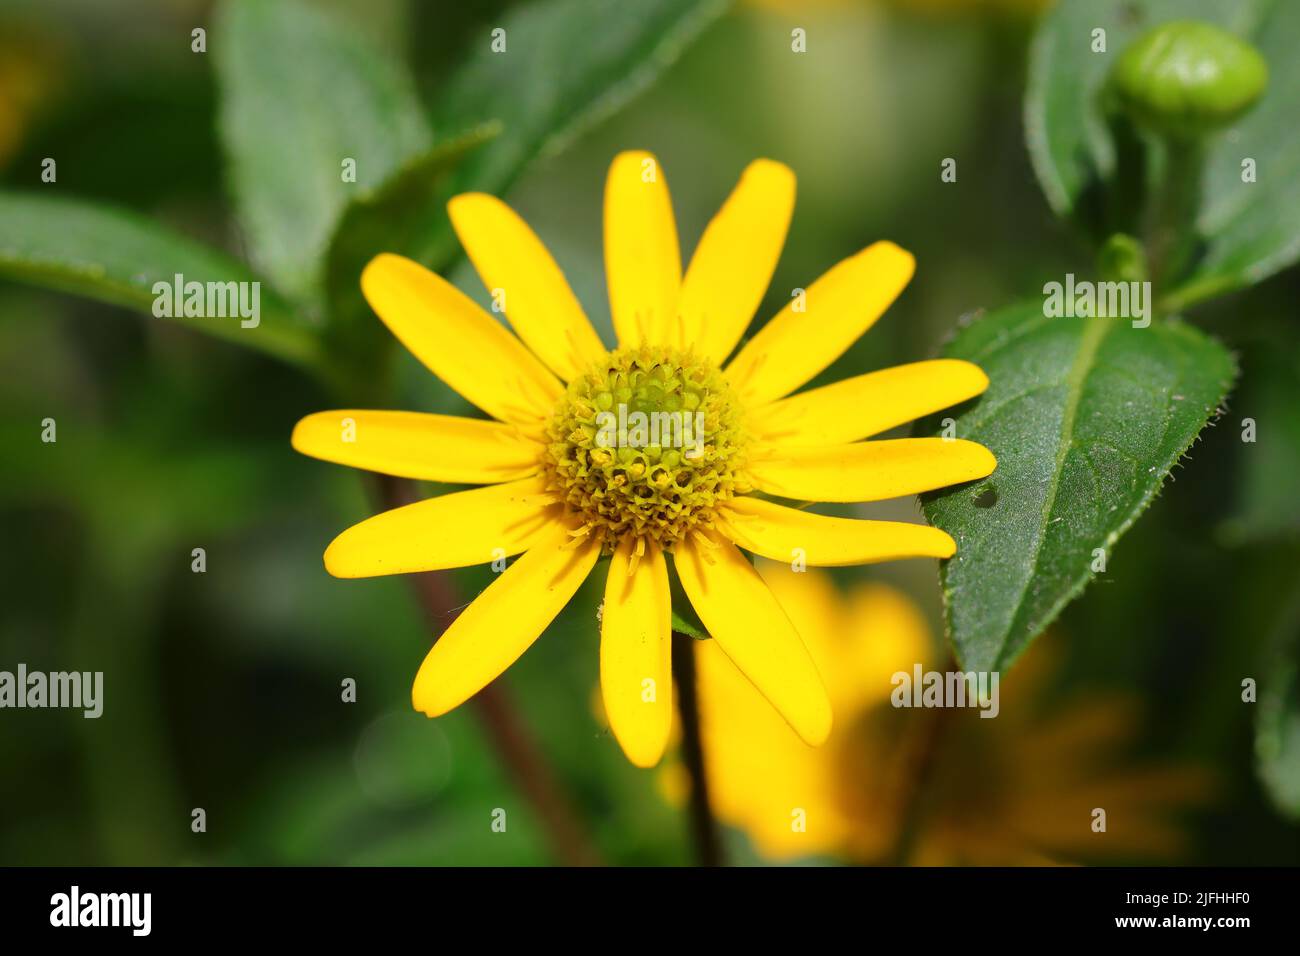 close-up of a beautiful yellow hussar button flower of the sanvitalia variety against a green blurred background Stock Photo